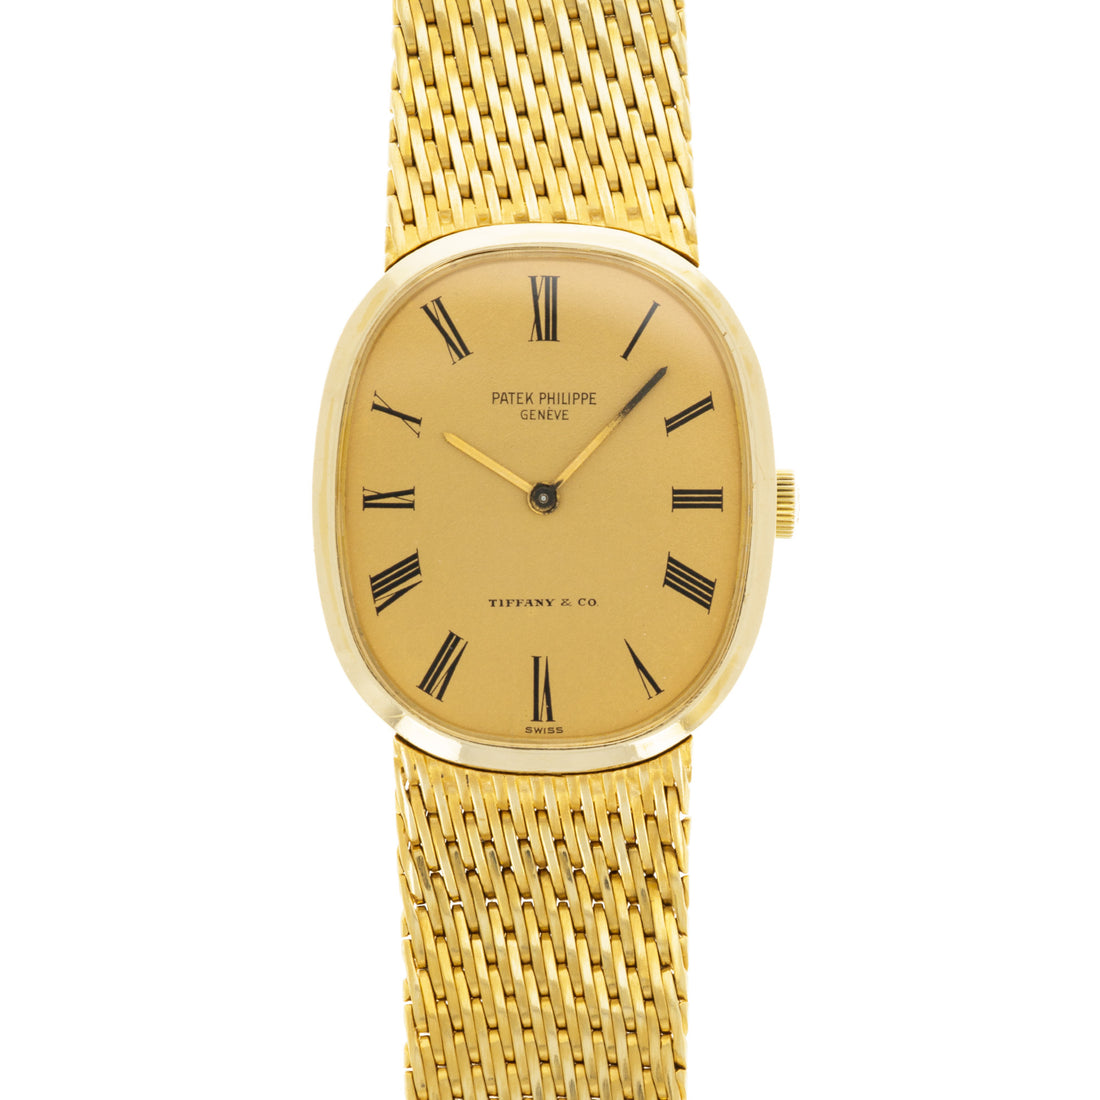 Patek Philippe Yellow Gold Ellipse Ref. 3548 Retailed by Tiffany & Co.